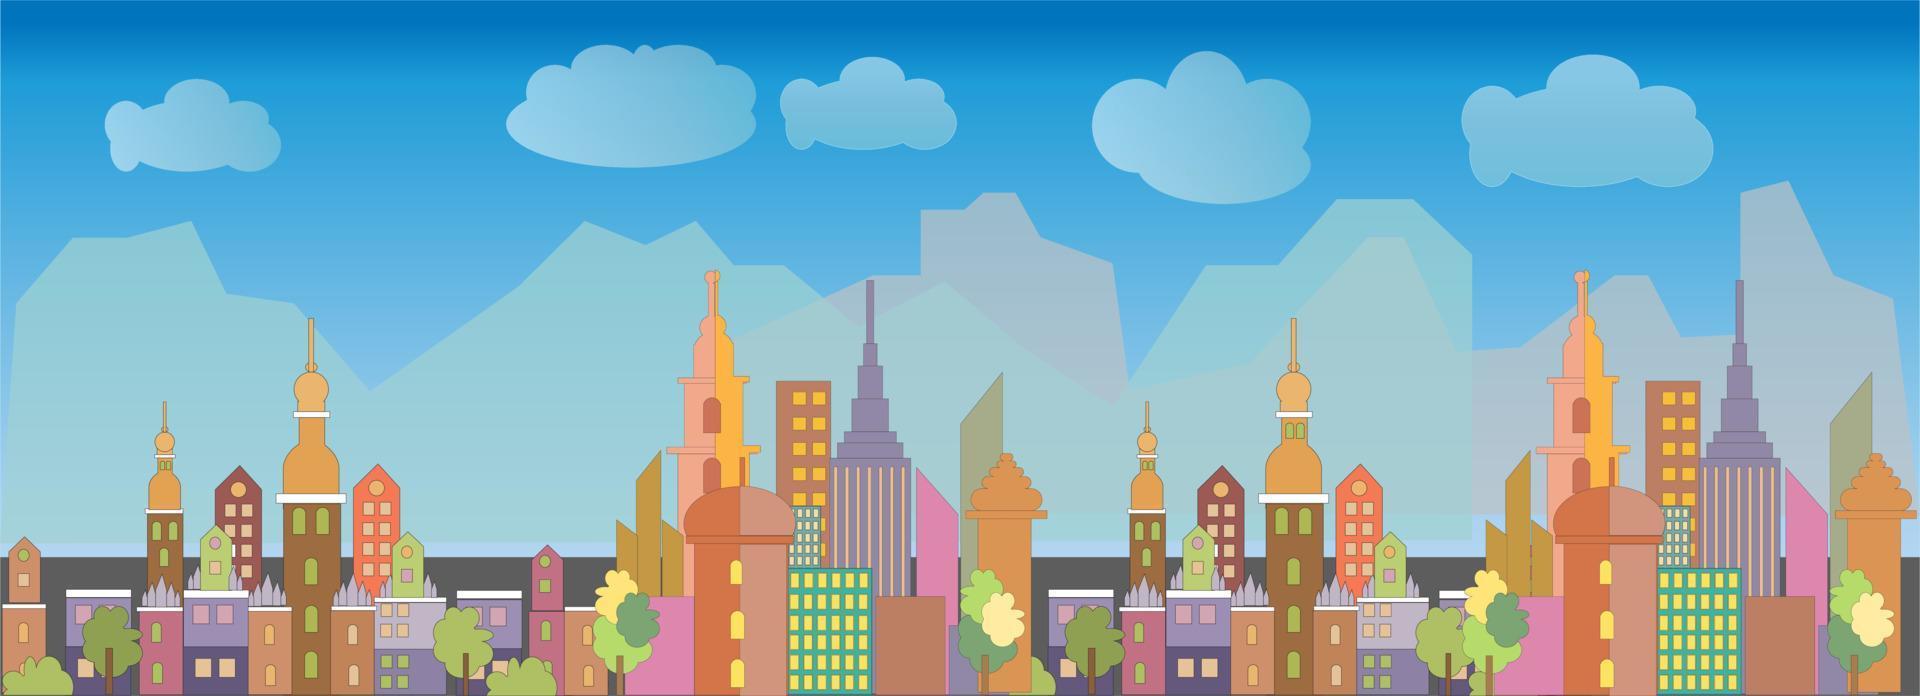 City Game background vector